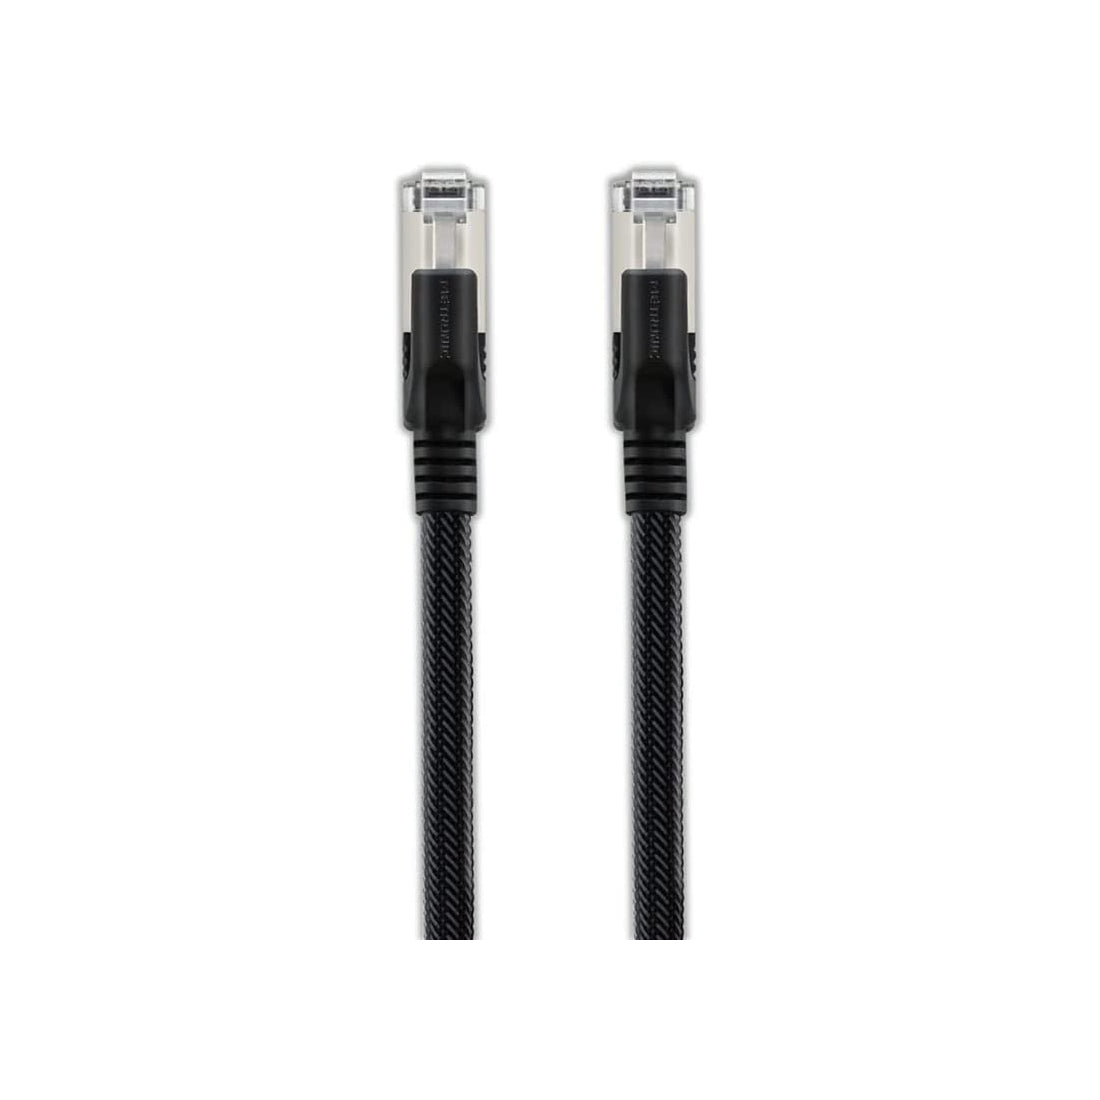 Metrnic Ethernet cable RJ45 CAT 8 male/male twisted - S/FTP, network cable 1.5 m